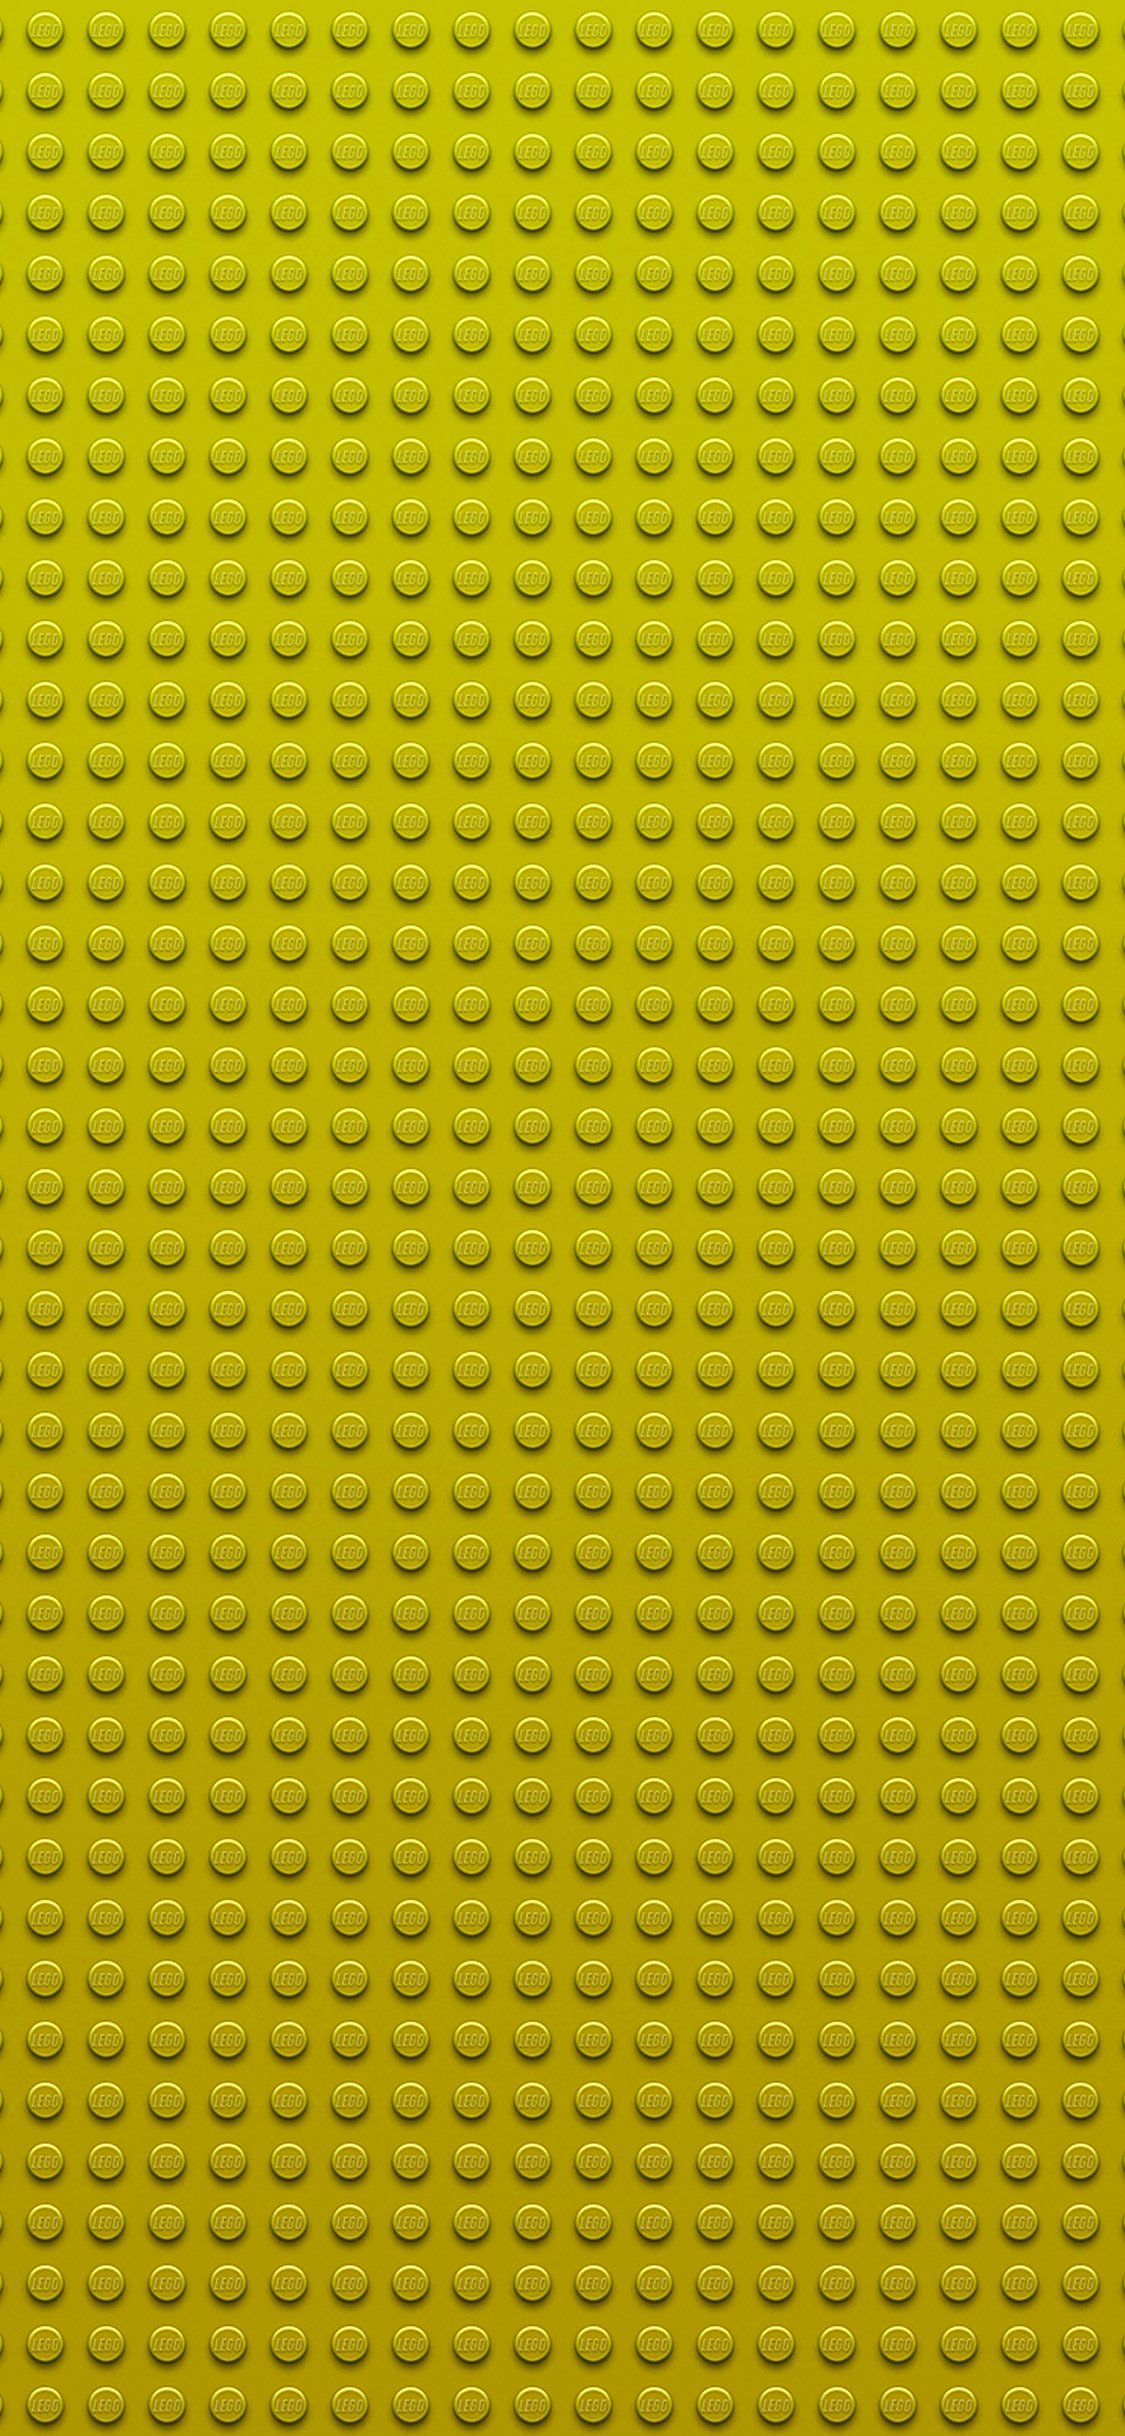 Lego Toy Yellow Gold Block Pattern Iphone X Wallpapers Free Download